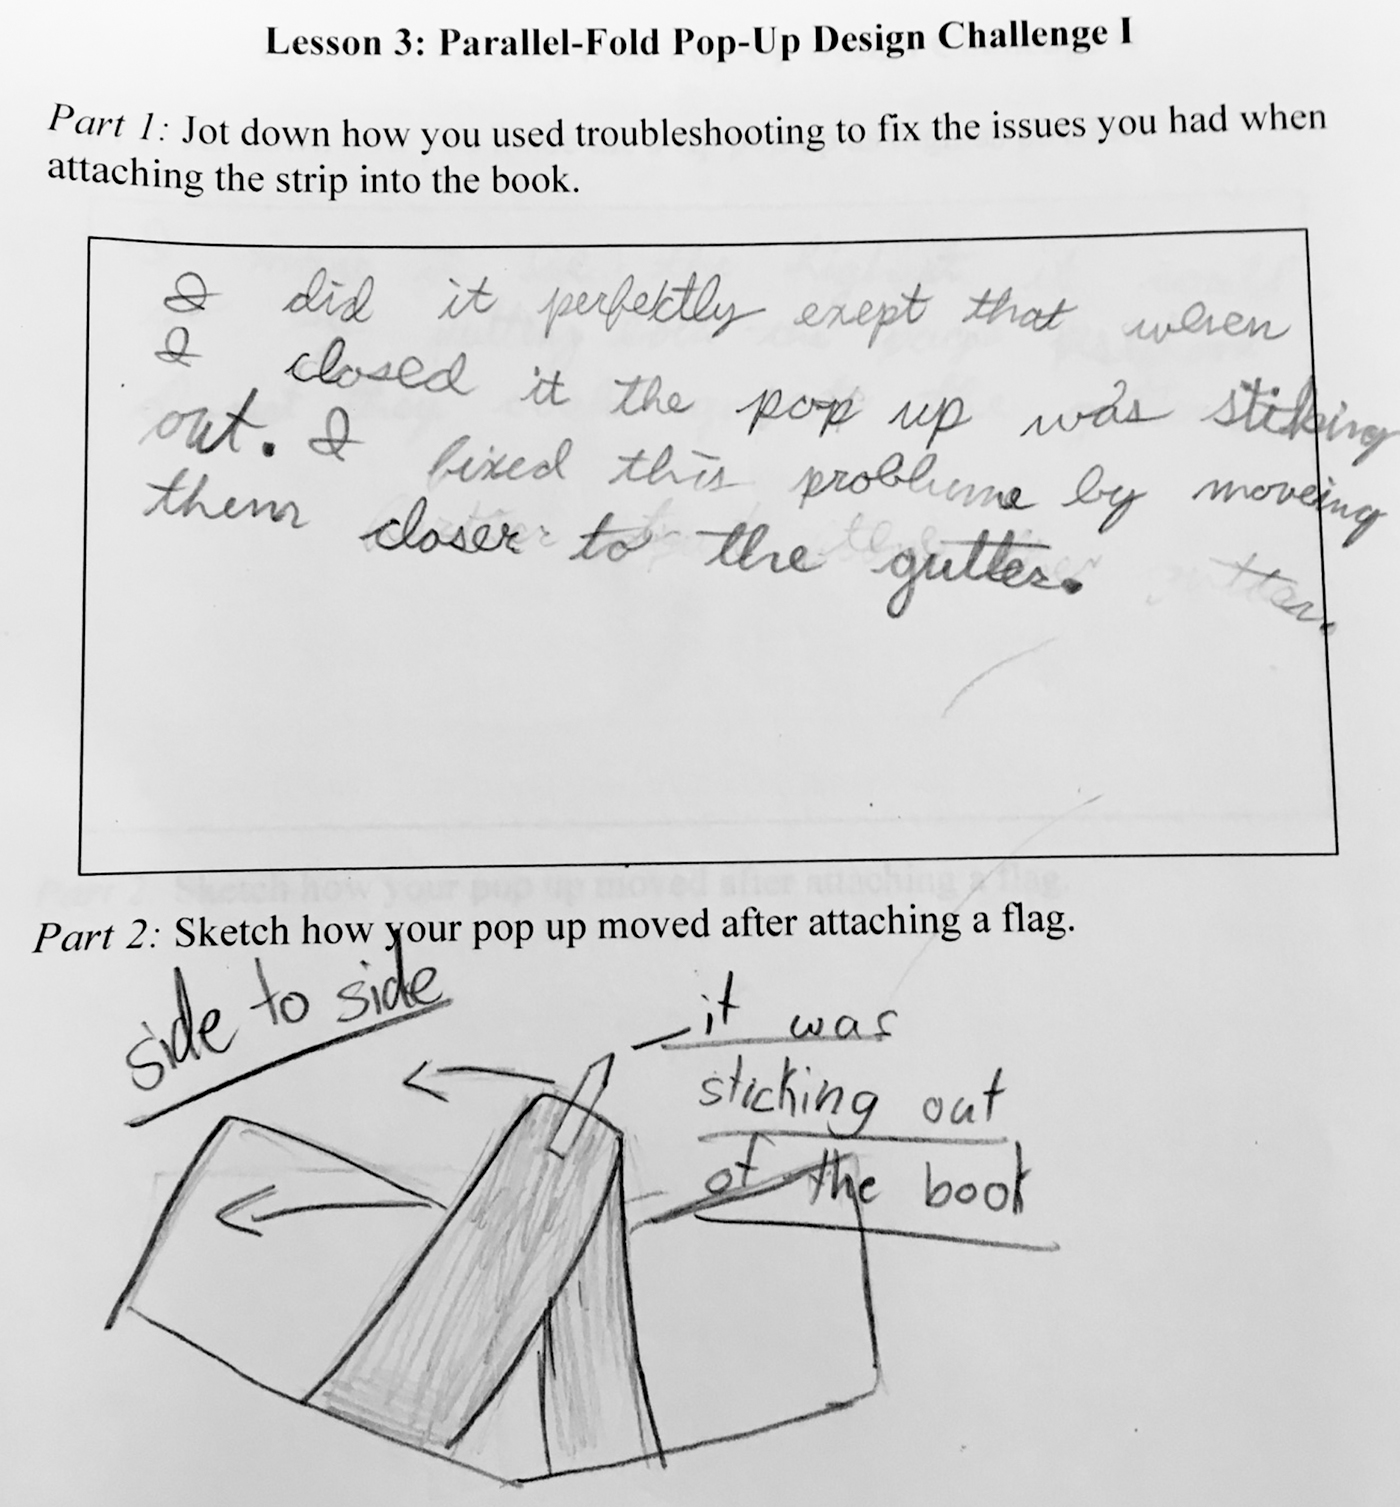 Text from a student’s sketchbook explaining how she troubleshot to fix issues in a design challenge.